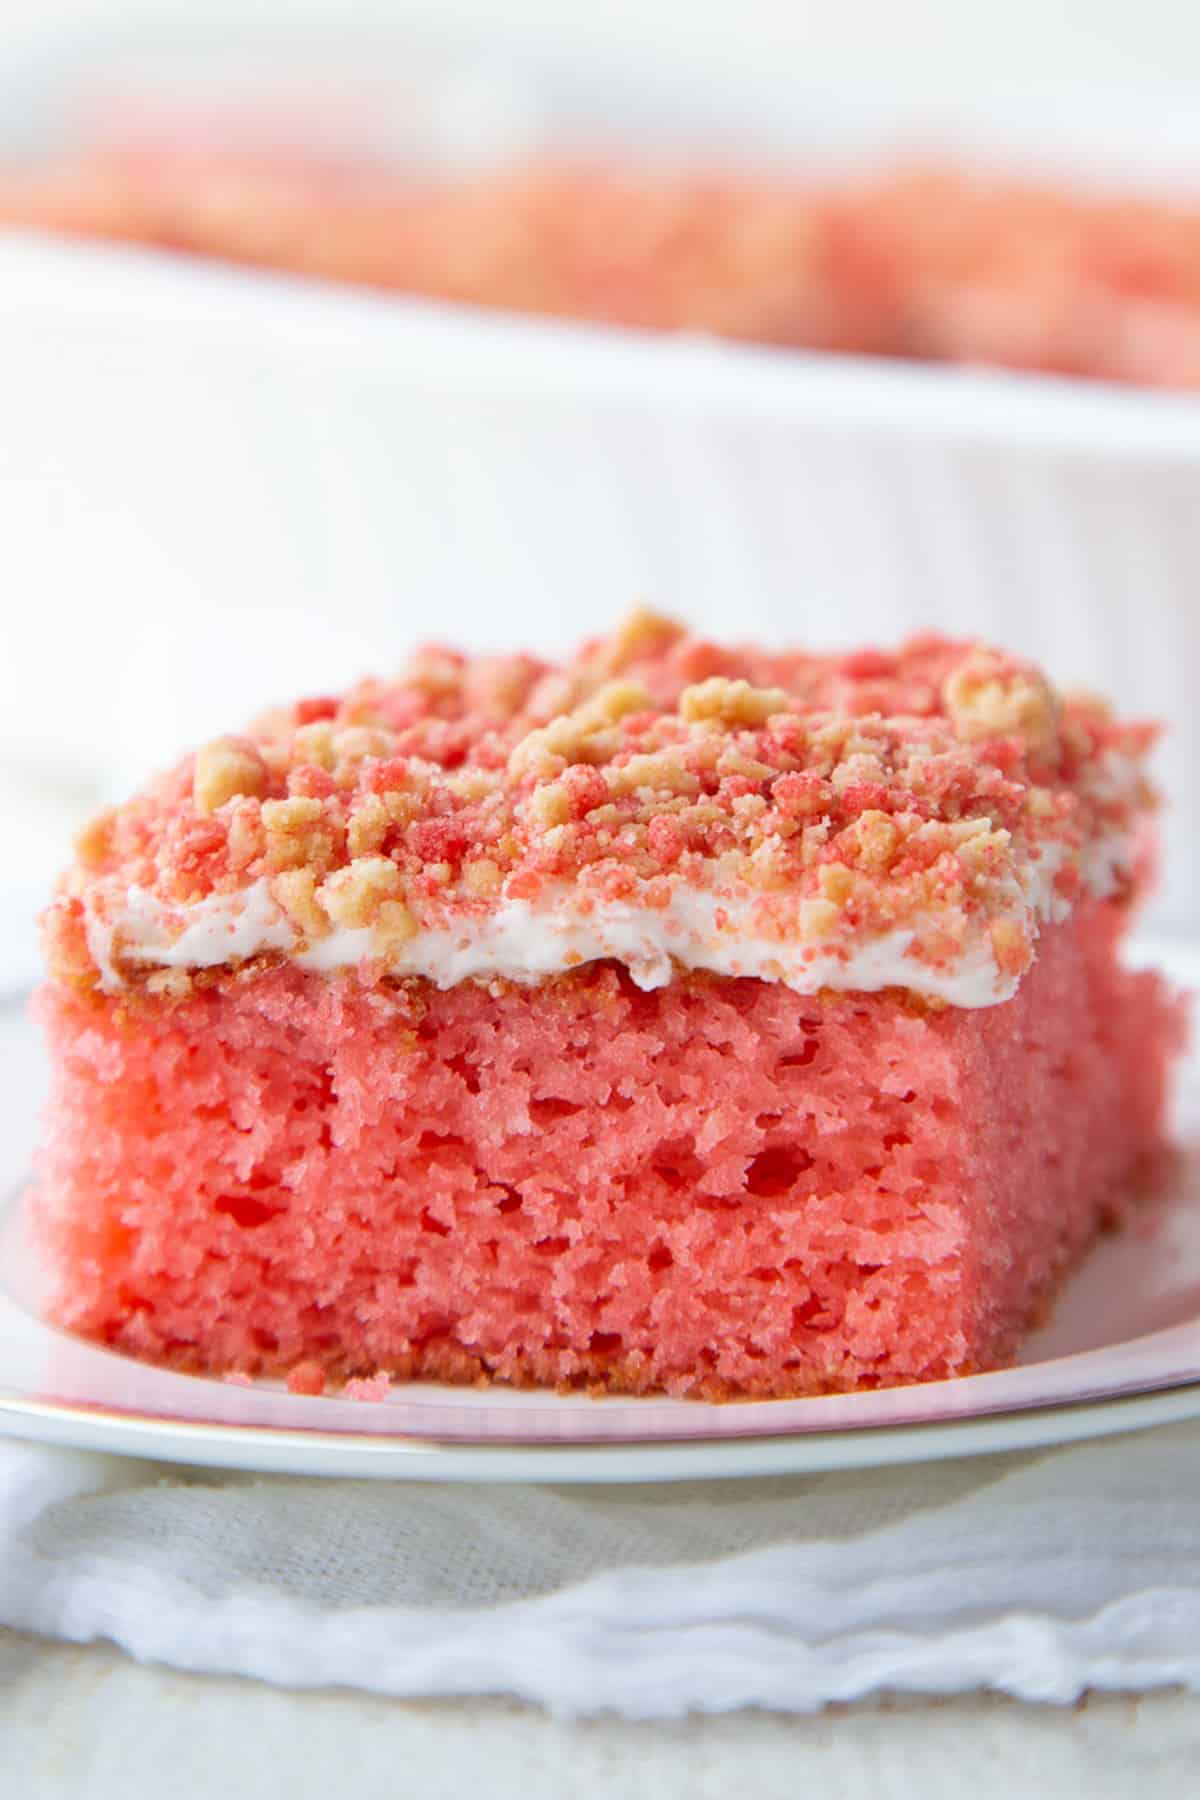 slice of strawberry crunch cake with cream cheese frosting and a crunchy strawberry crumble on top.